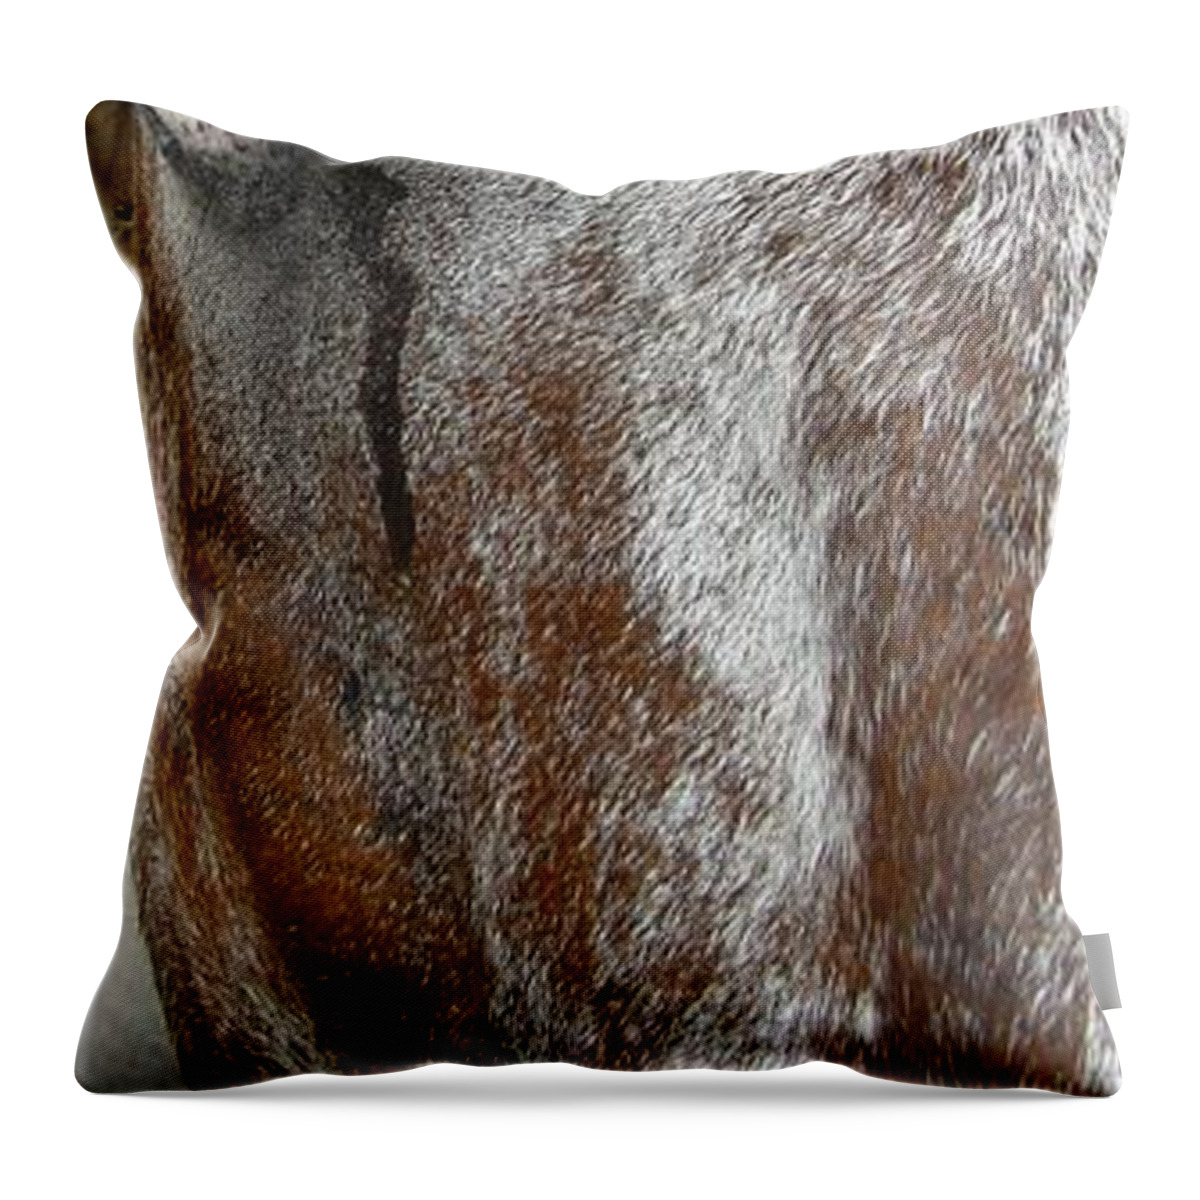 Horse Throw Pillow featuring the photograph The Horse by Carl Moore